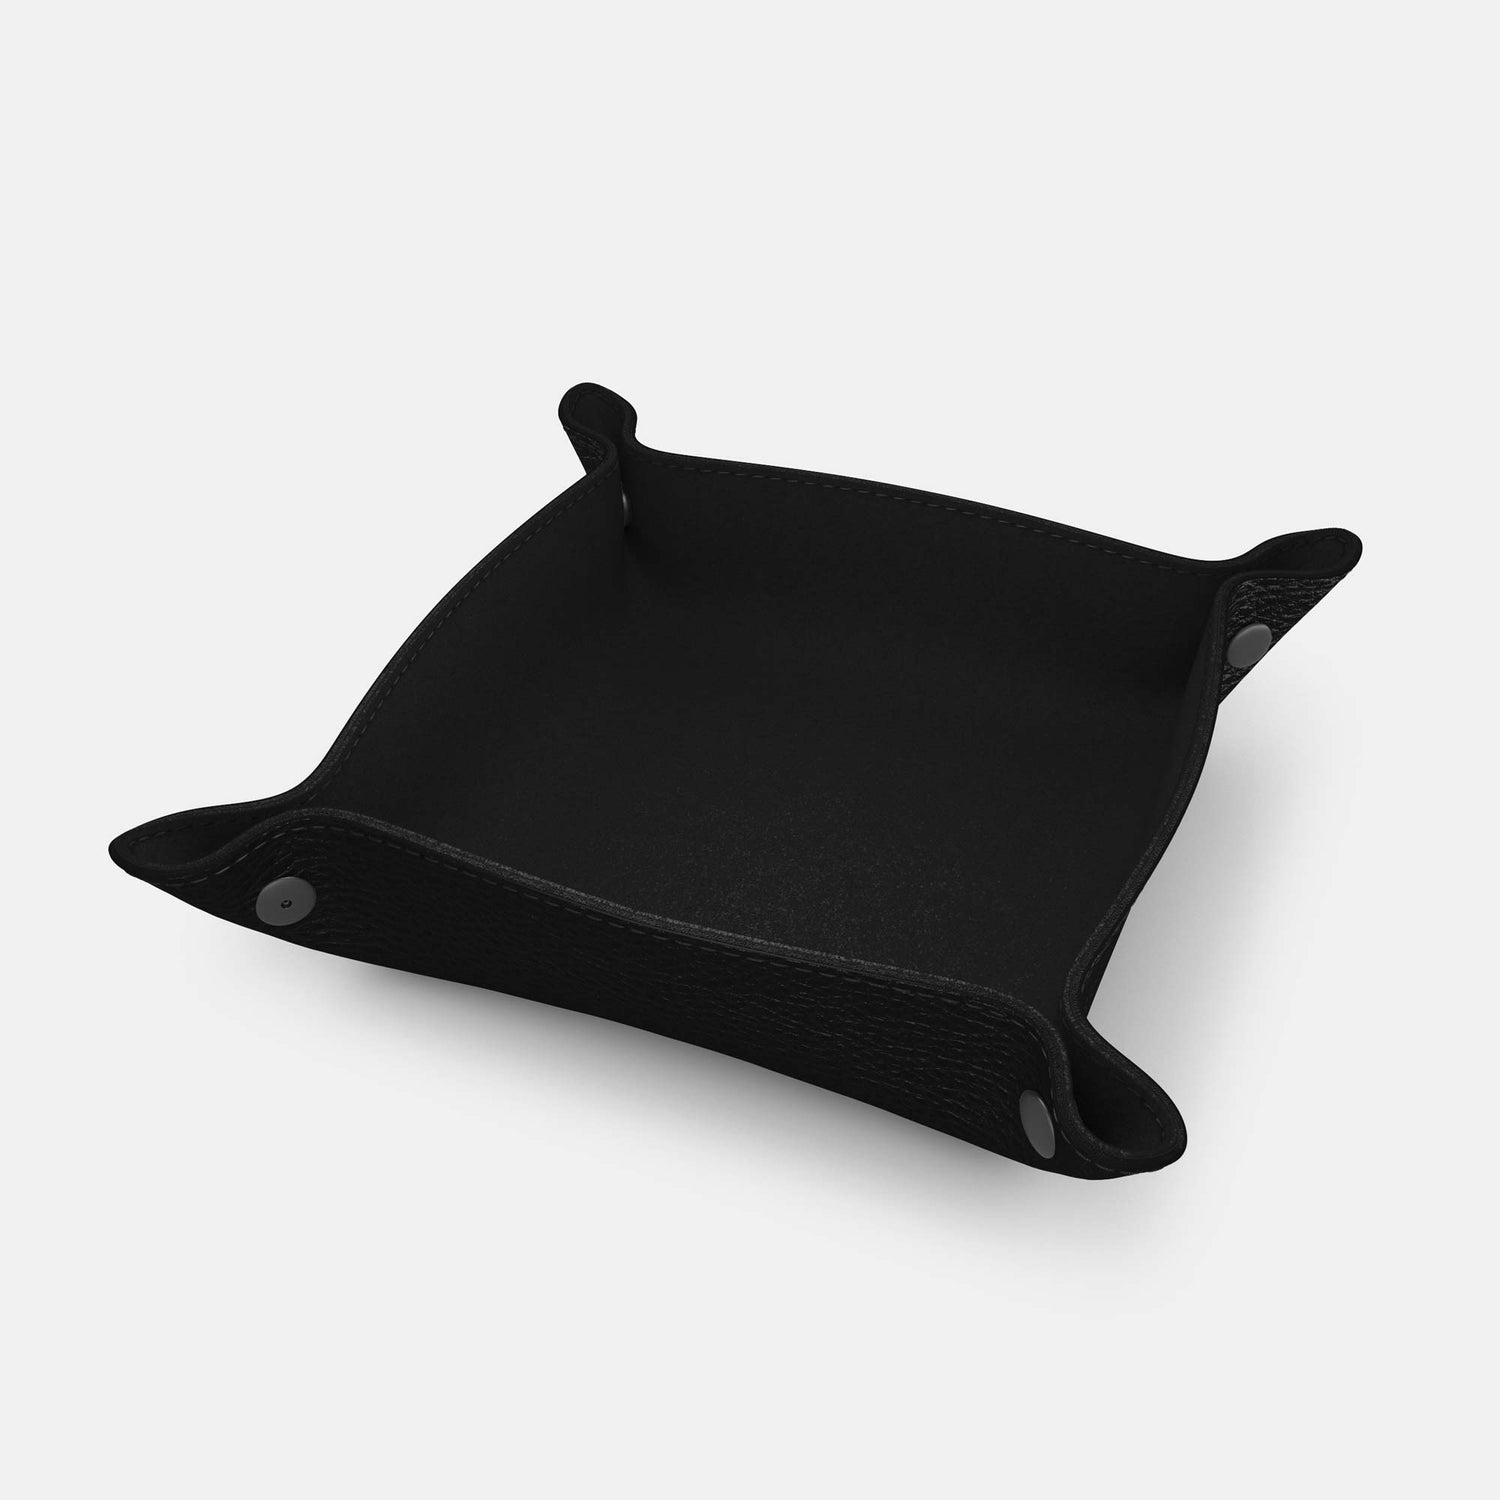 Leather Catch-all Tray - Black and Black - RYAN London